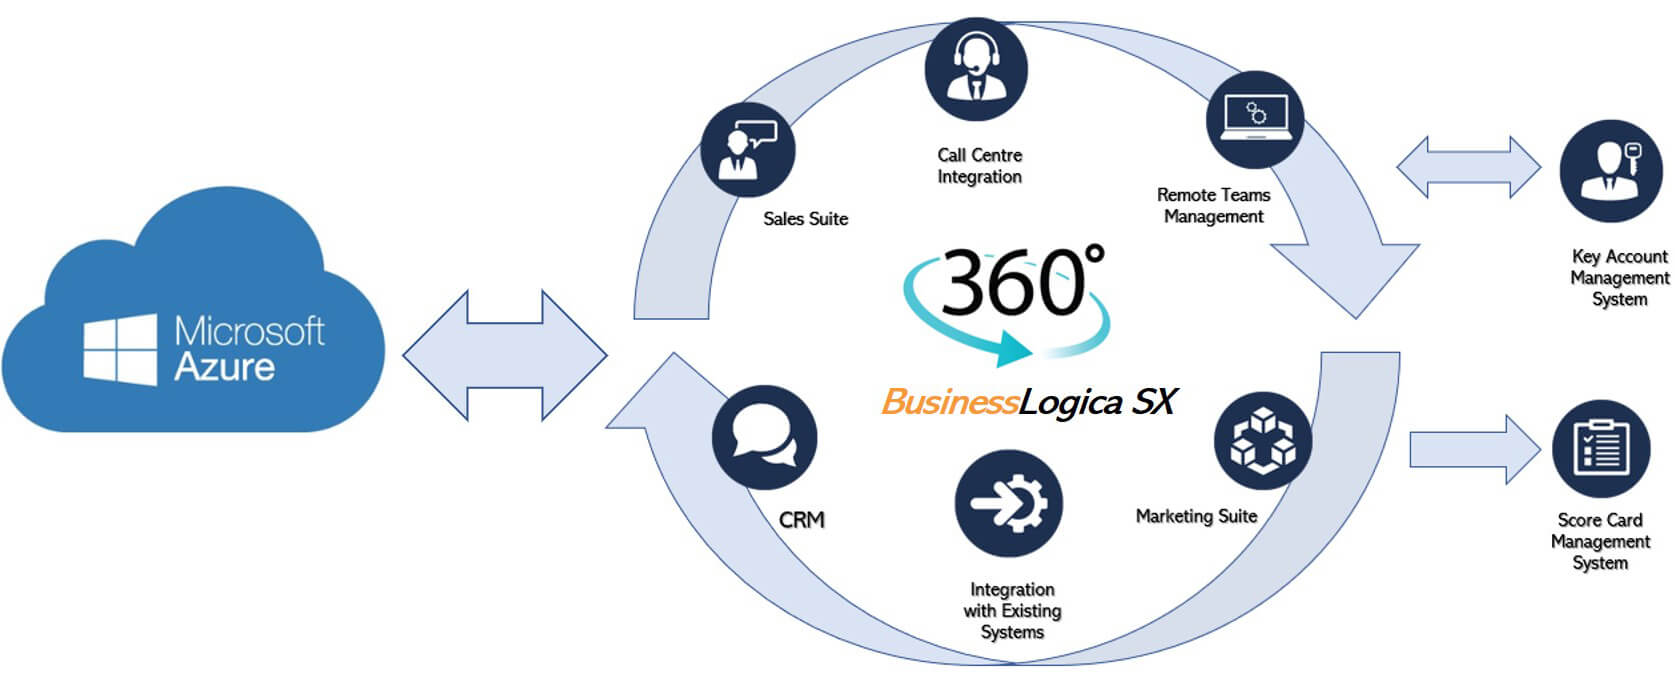 business logica structure and explanation 